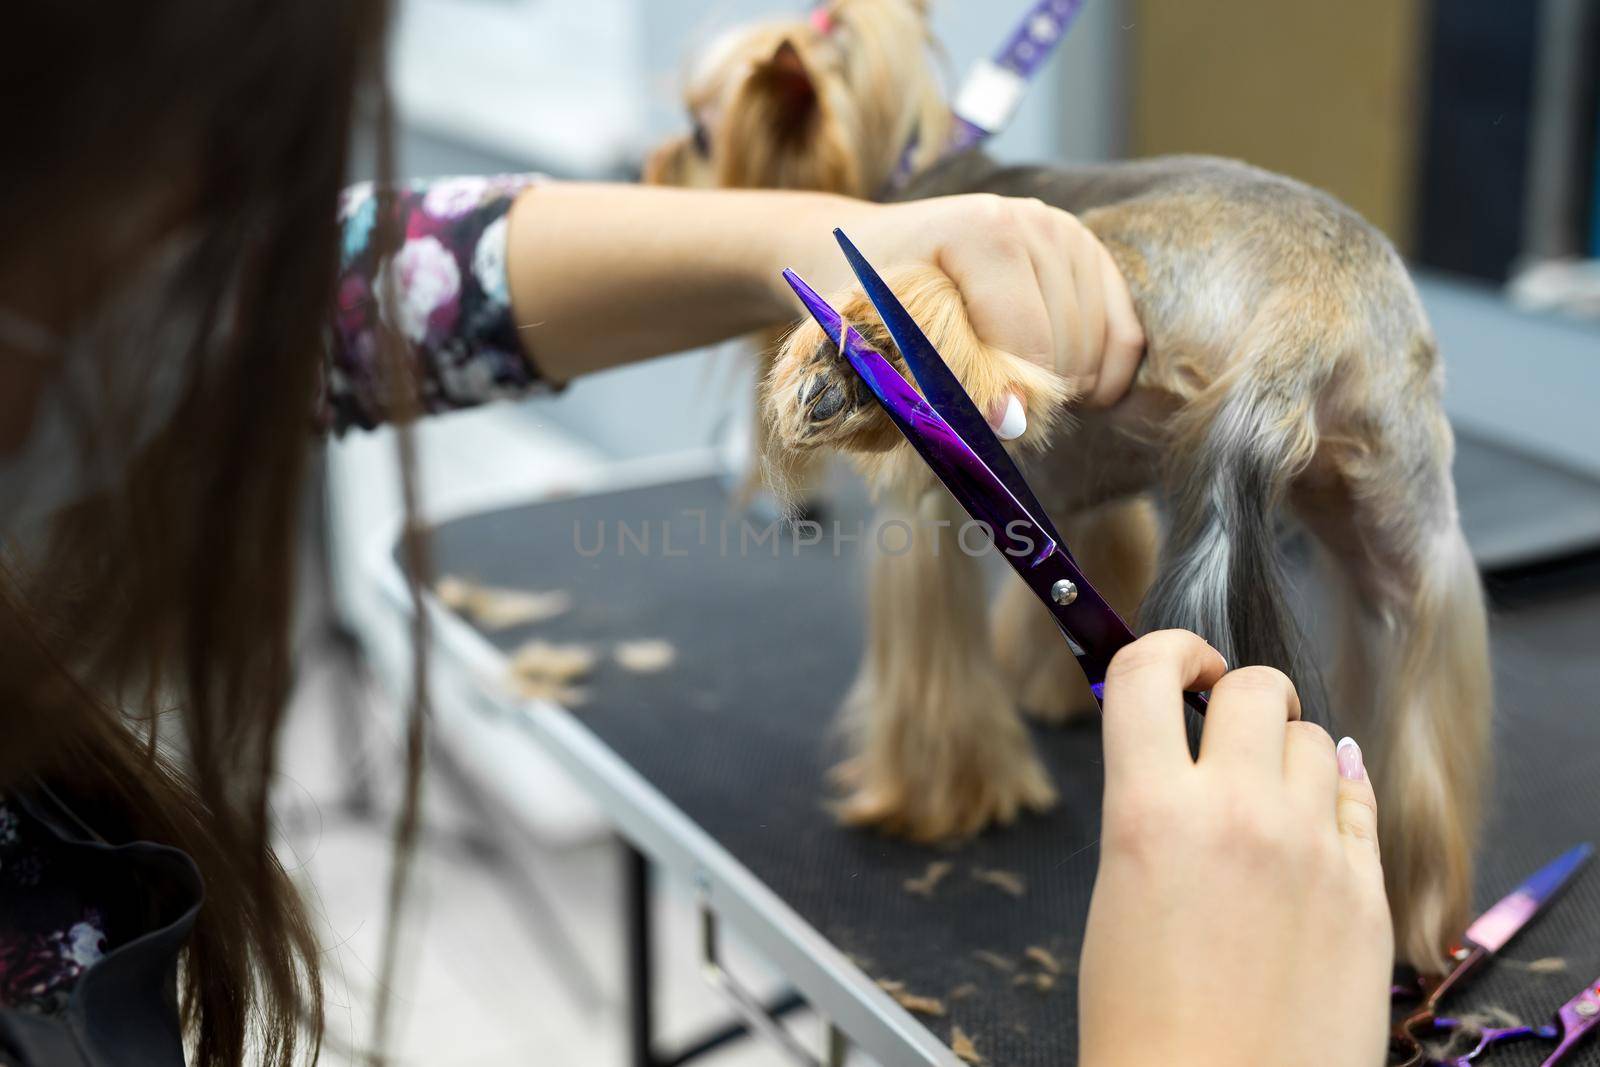 Female groomer haircut yorkshire terrier on the table for grooming in the beauty salon for dogs. Toned image. process of final shearing of a dog's hair with scissors